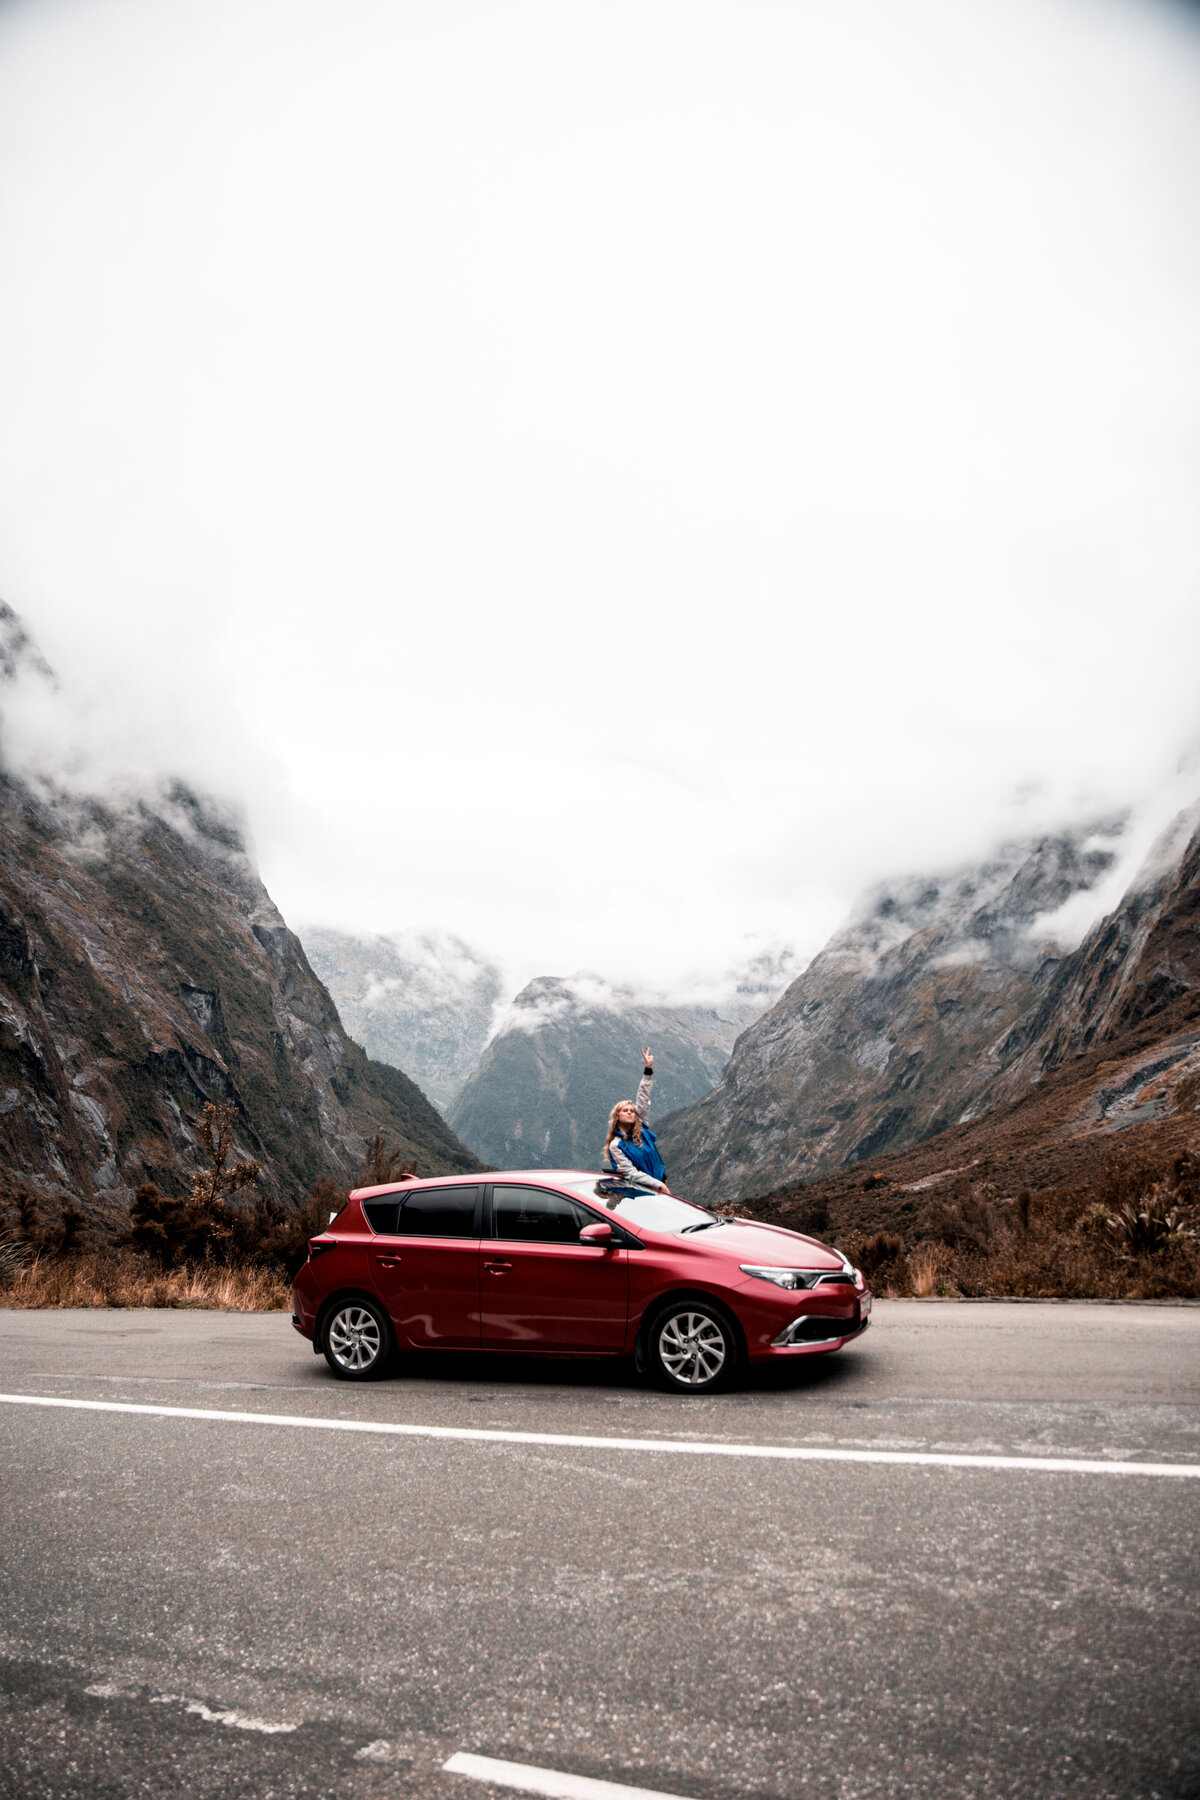 Red car traveling near Milford Sound, New Zealand